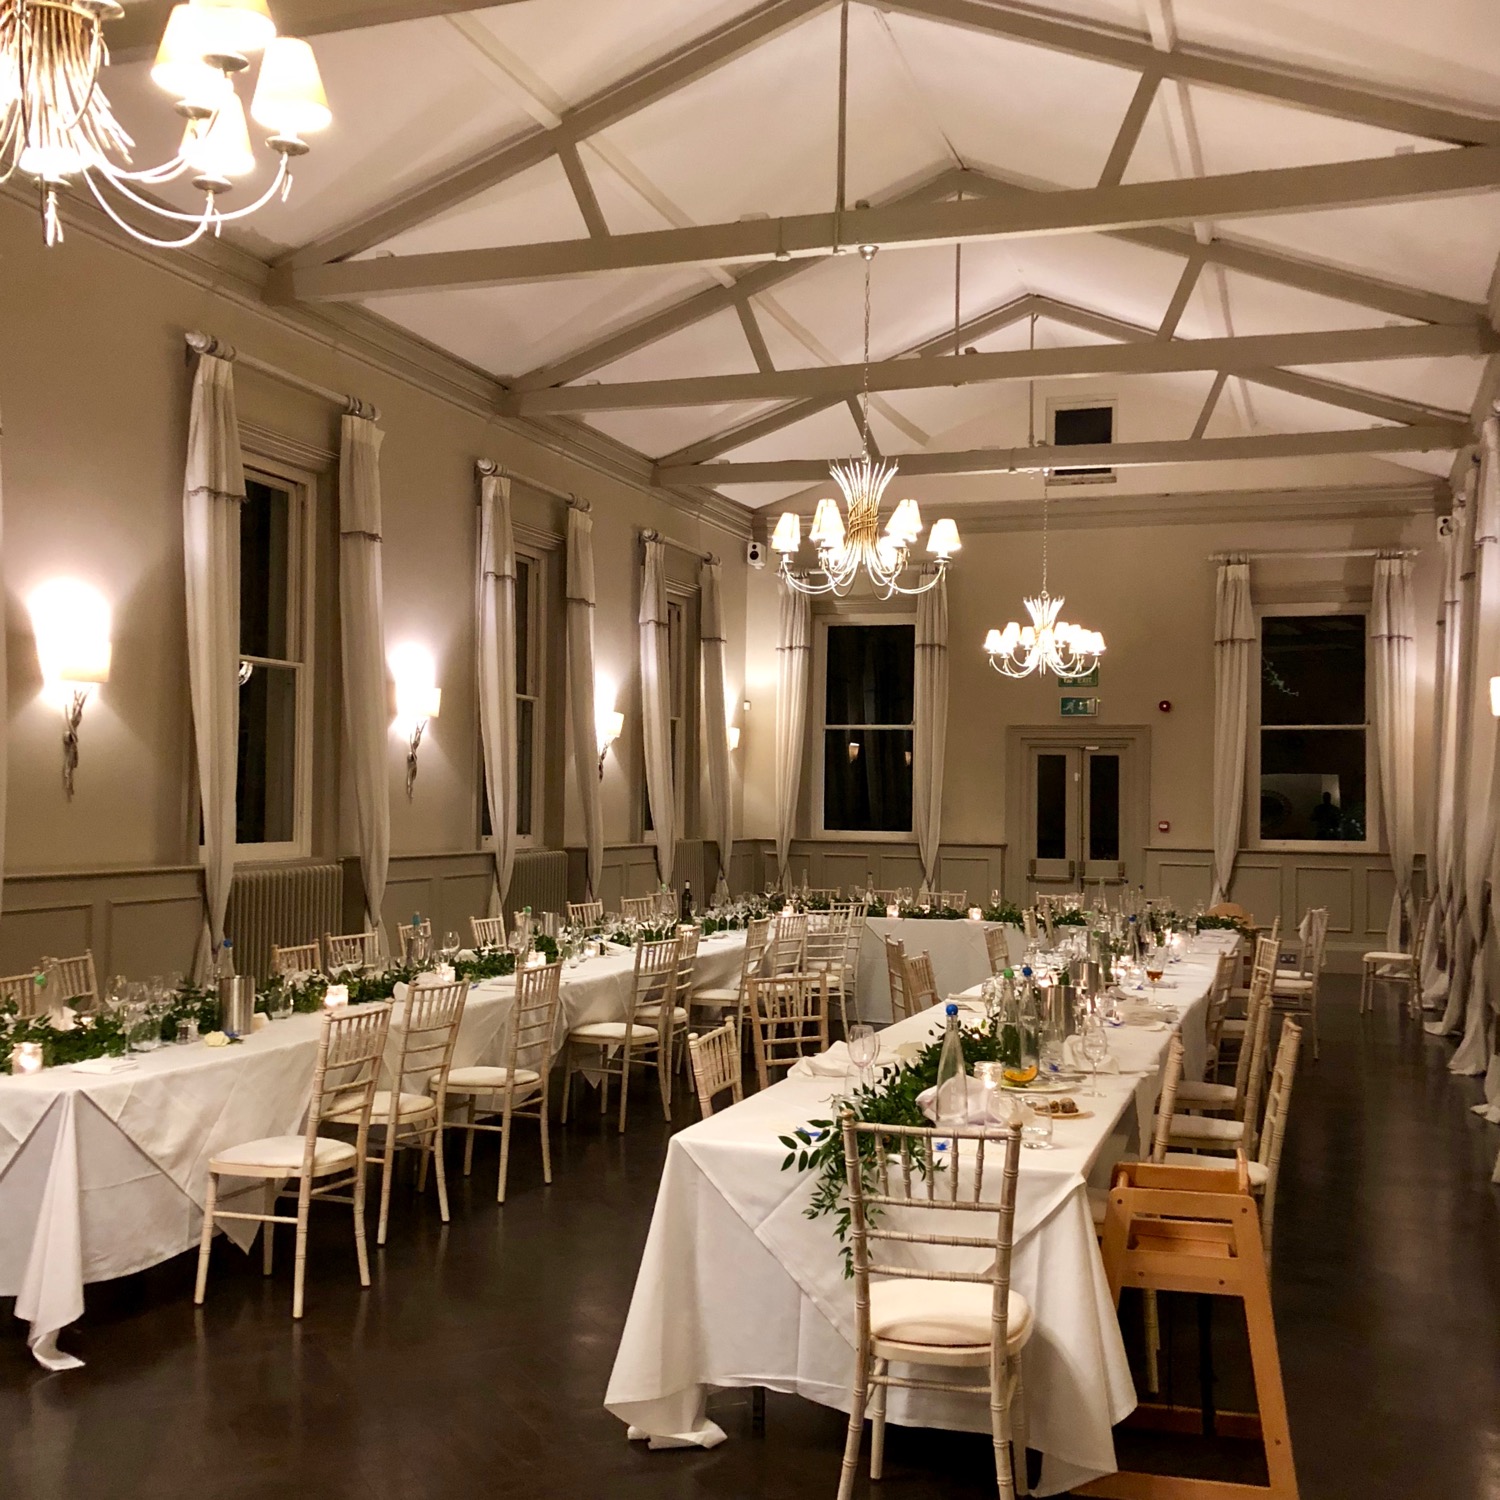 The stunning setting for your wedding breakfast at Morden Hall